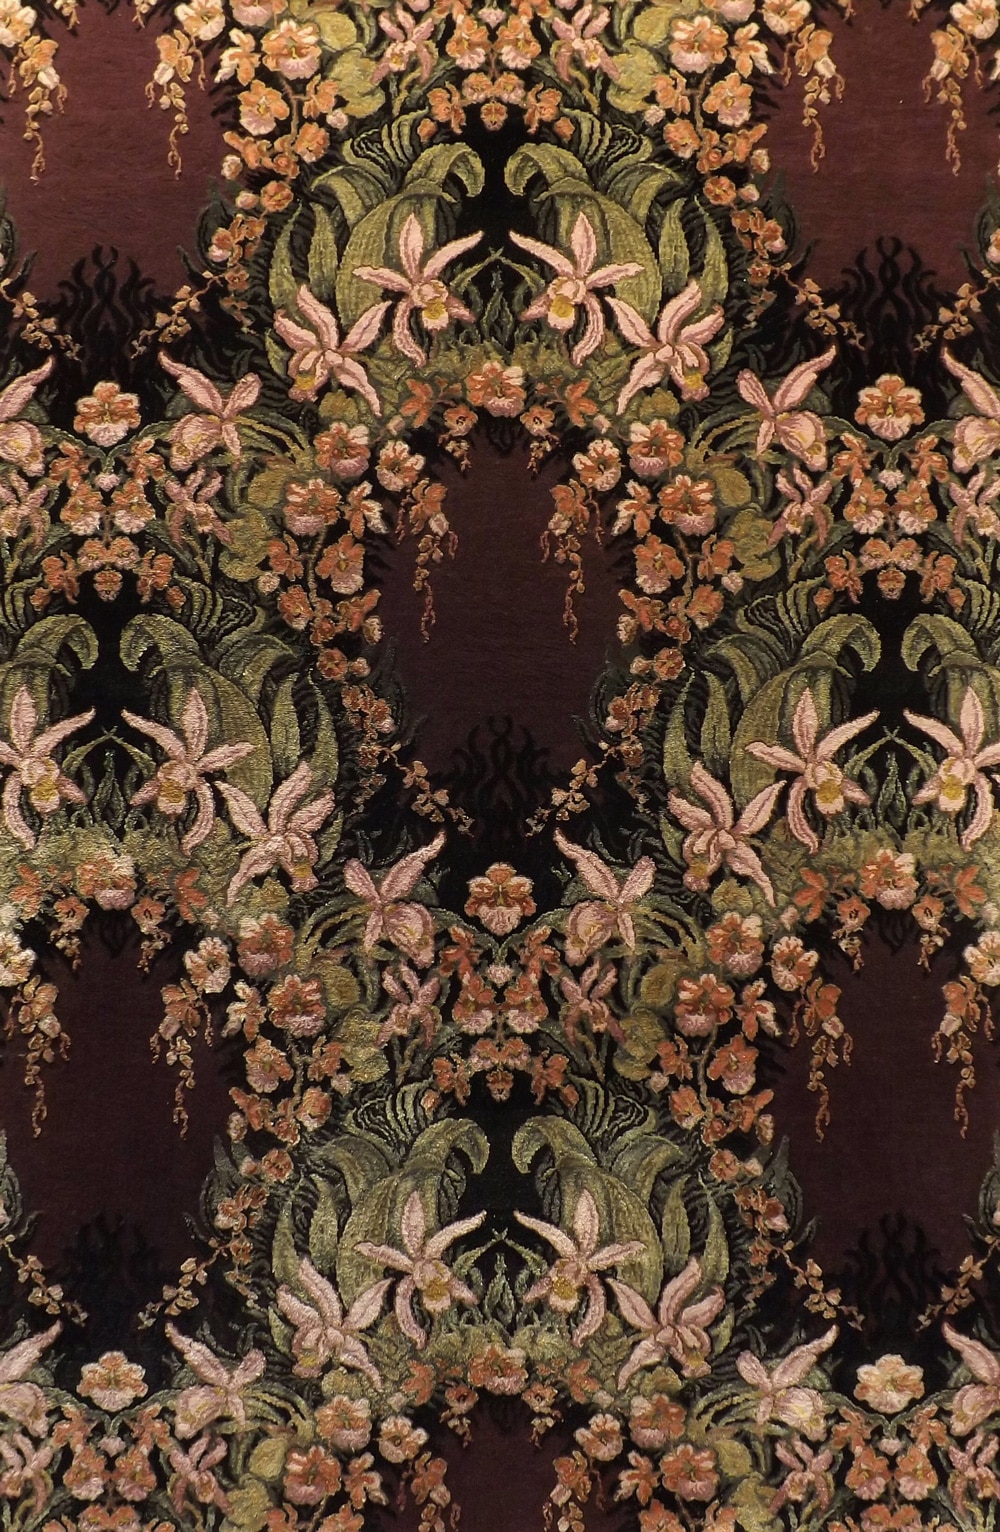 Orchid, The Royal Horticultural Society Lindley Collection, The Moorland Rug Company Ltd